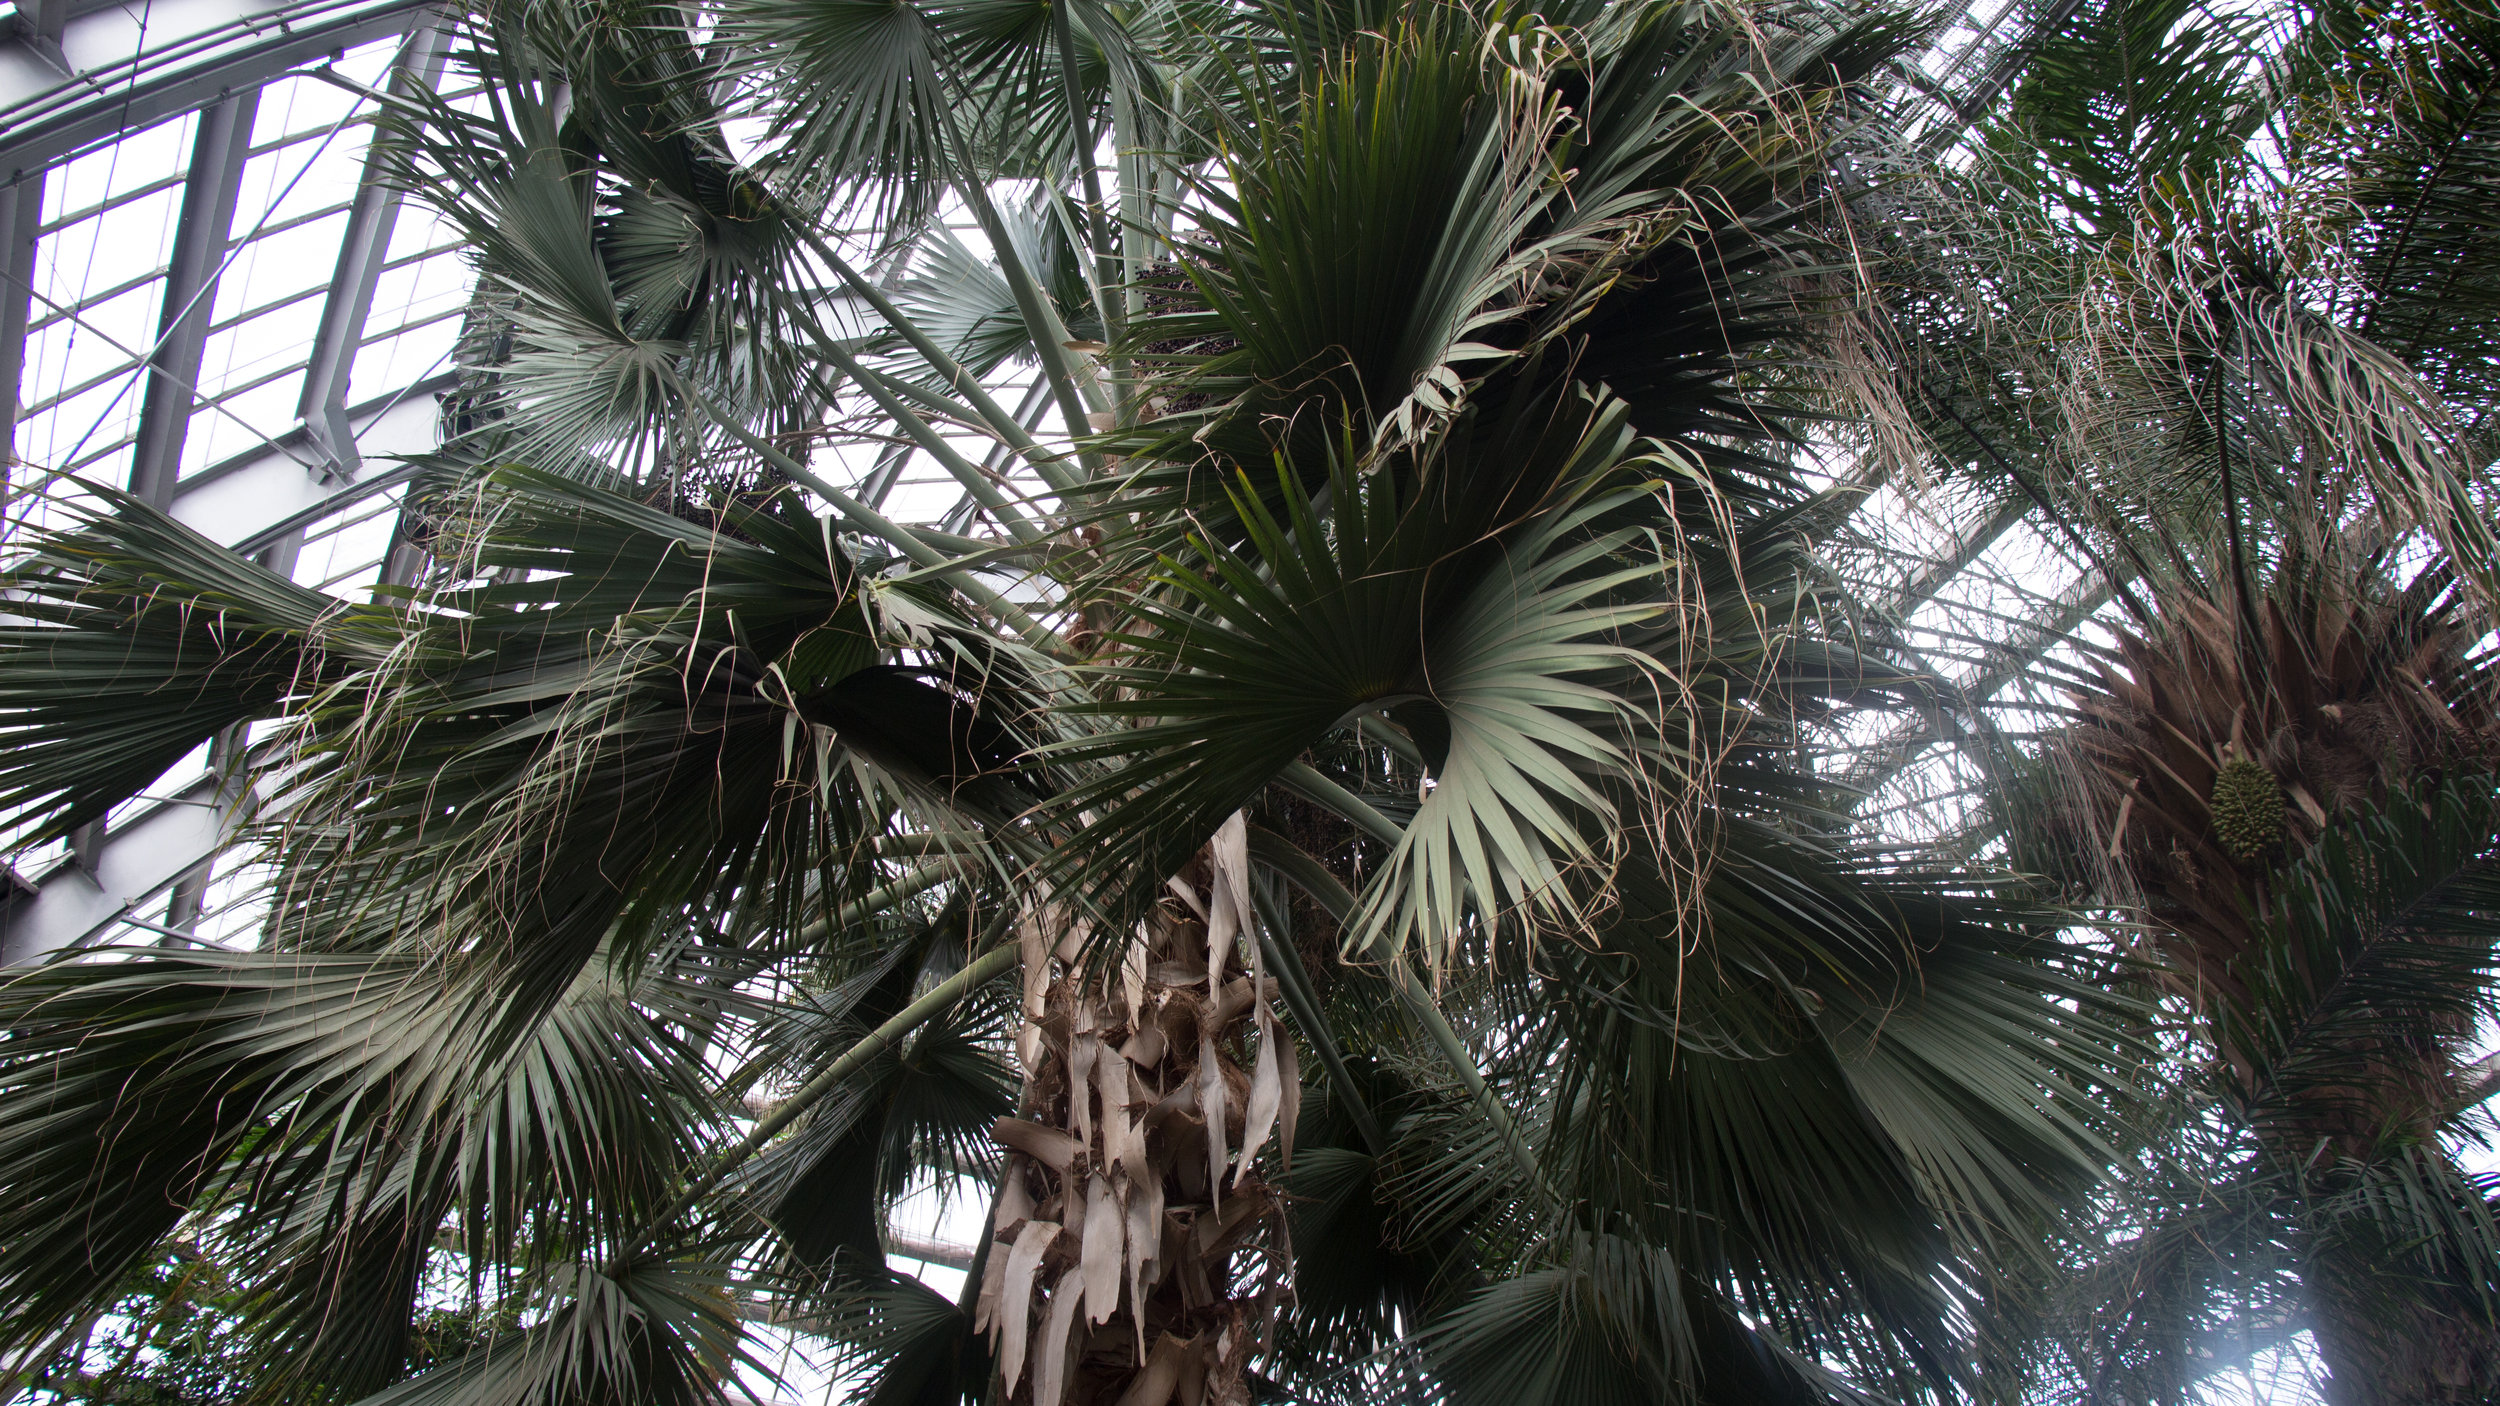  93 year old Sheelea palm tree that has outgrown its home at Garfield Park Conservatory. 